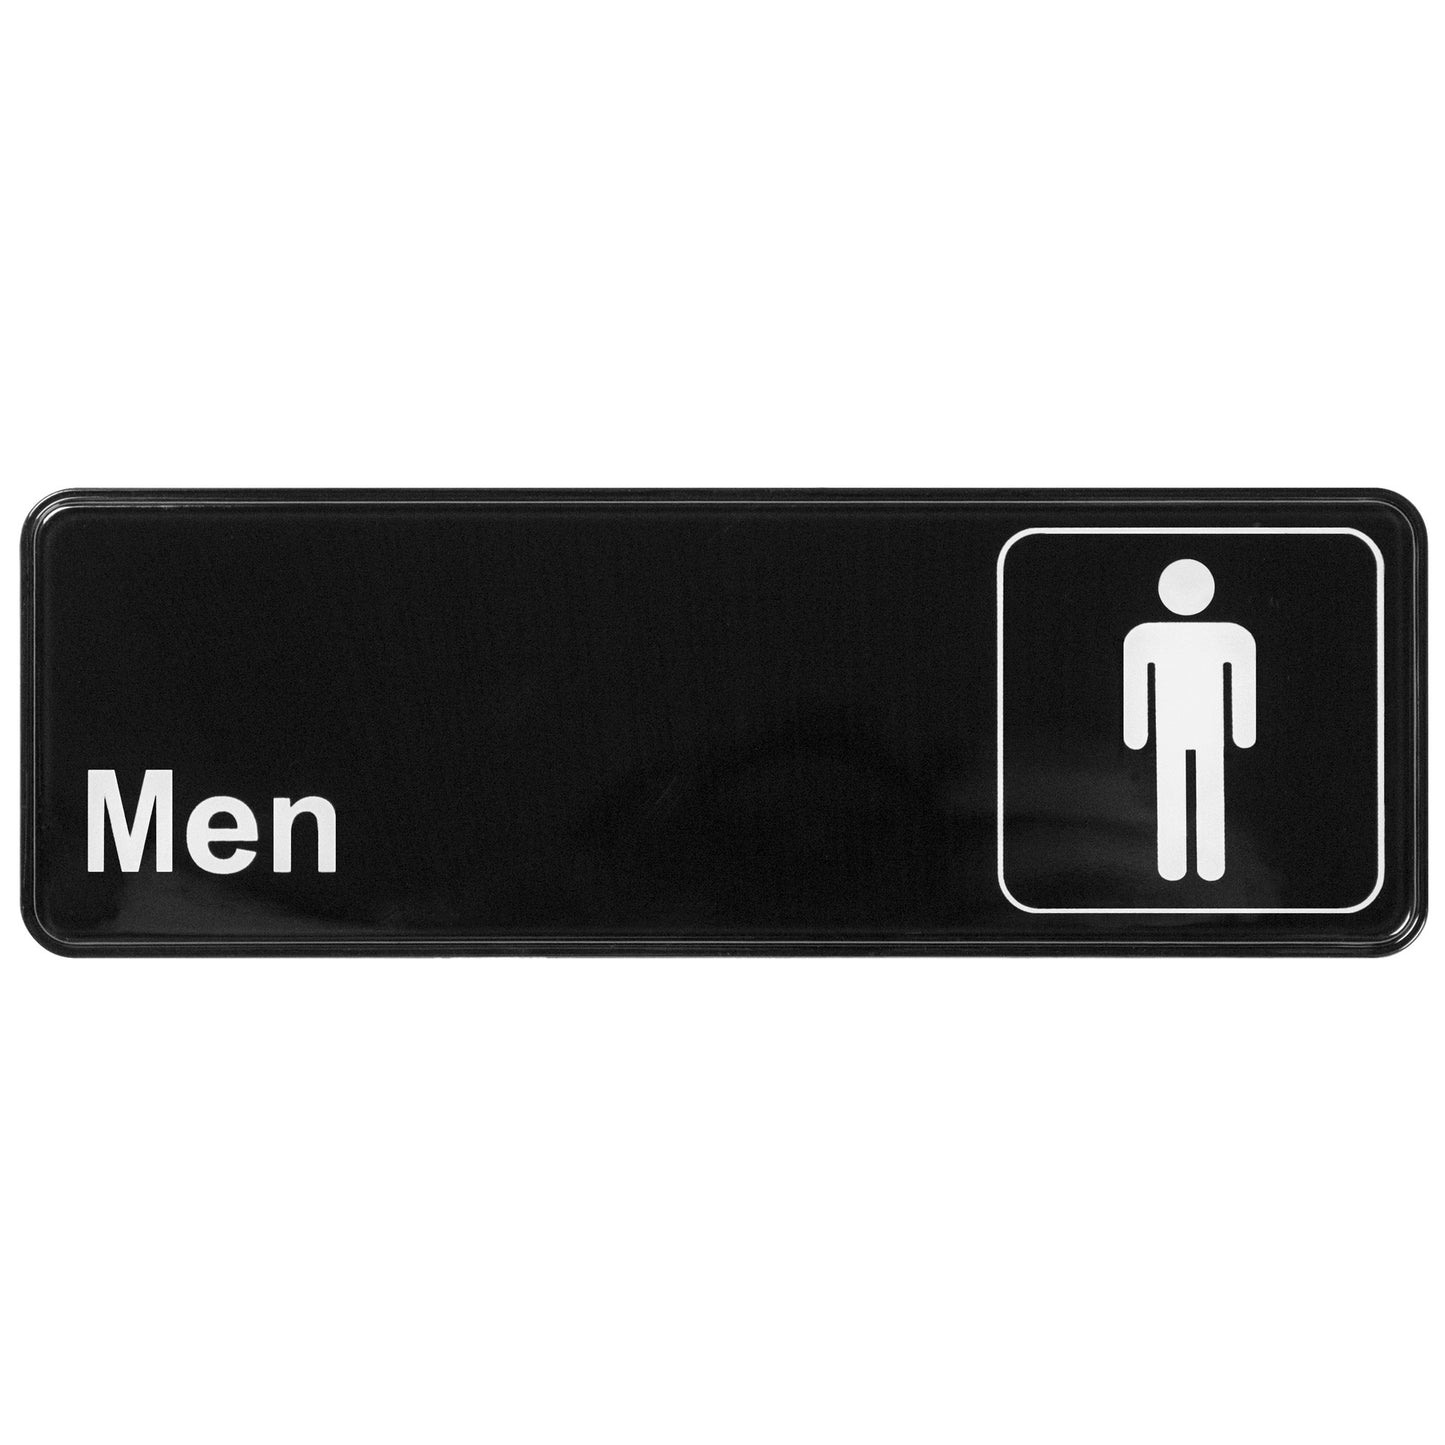 SGN-311 - Information Signs, 9"W x 3"H - SGN-311 - Men